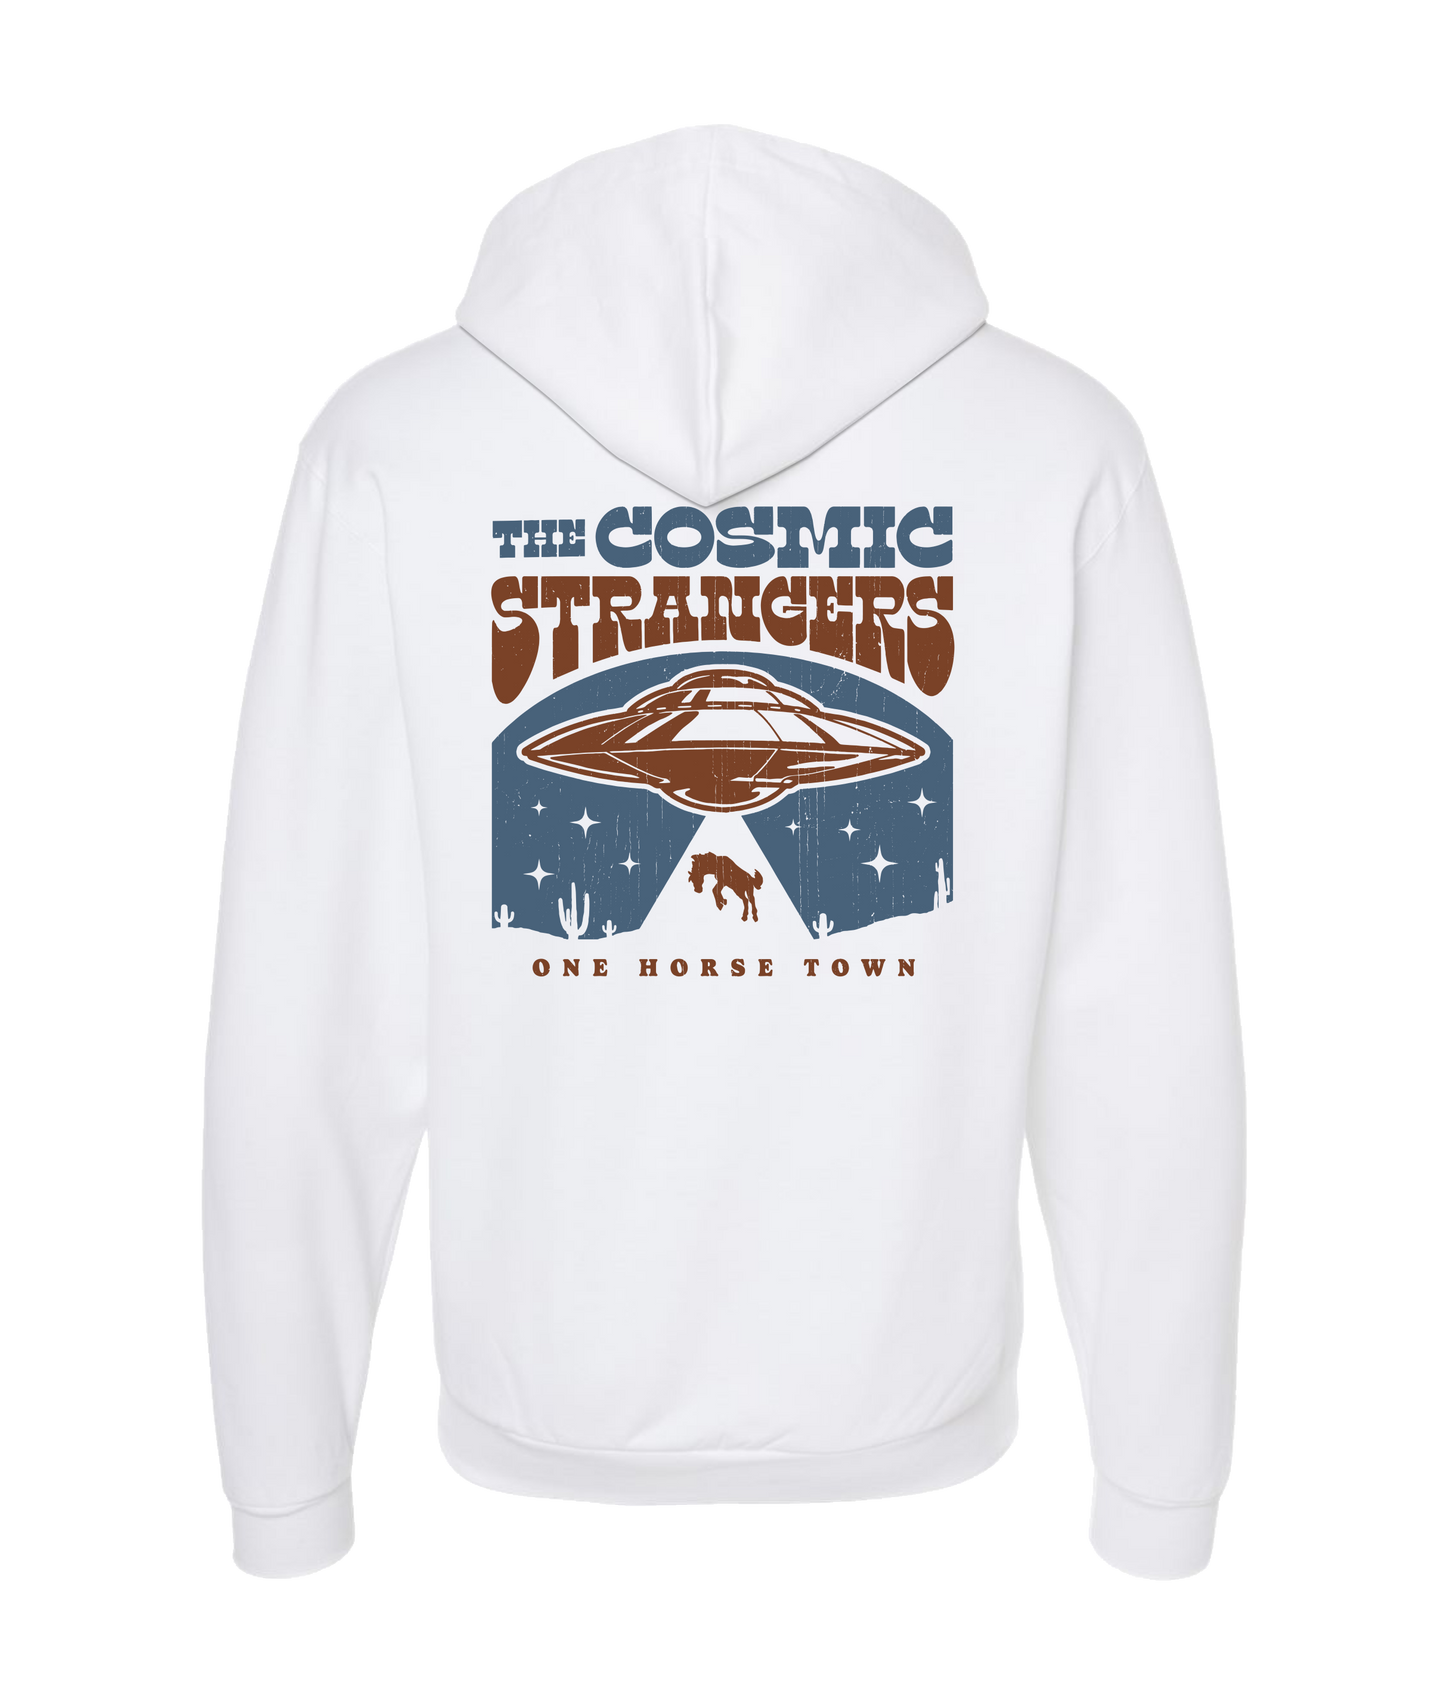 The Cosmic Strangers - One Horse Town - White Zip Up Hoodie